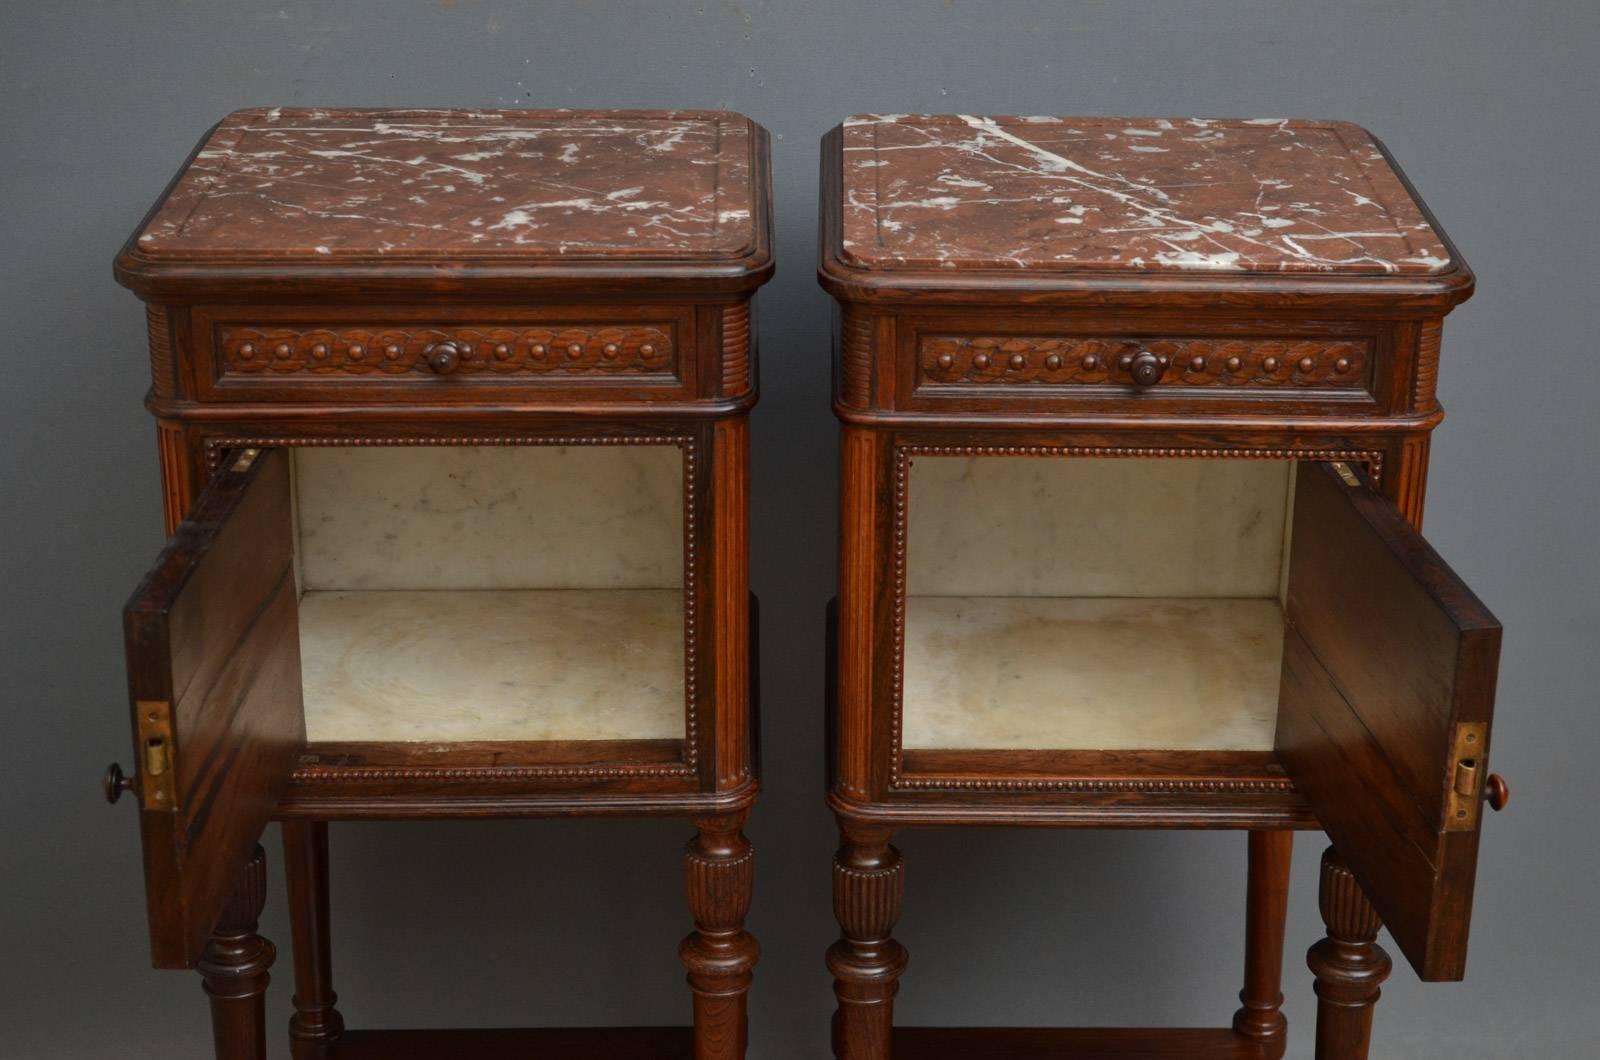 Late 19th Century Pair of Superb Quality Rosewood Bedside Cabinets by Maison Krieger, Paris